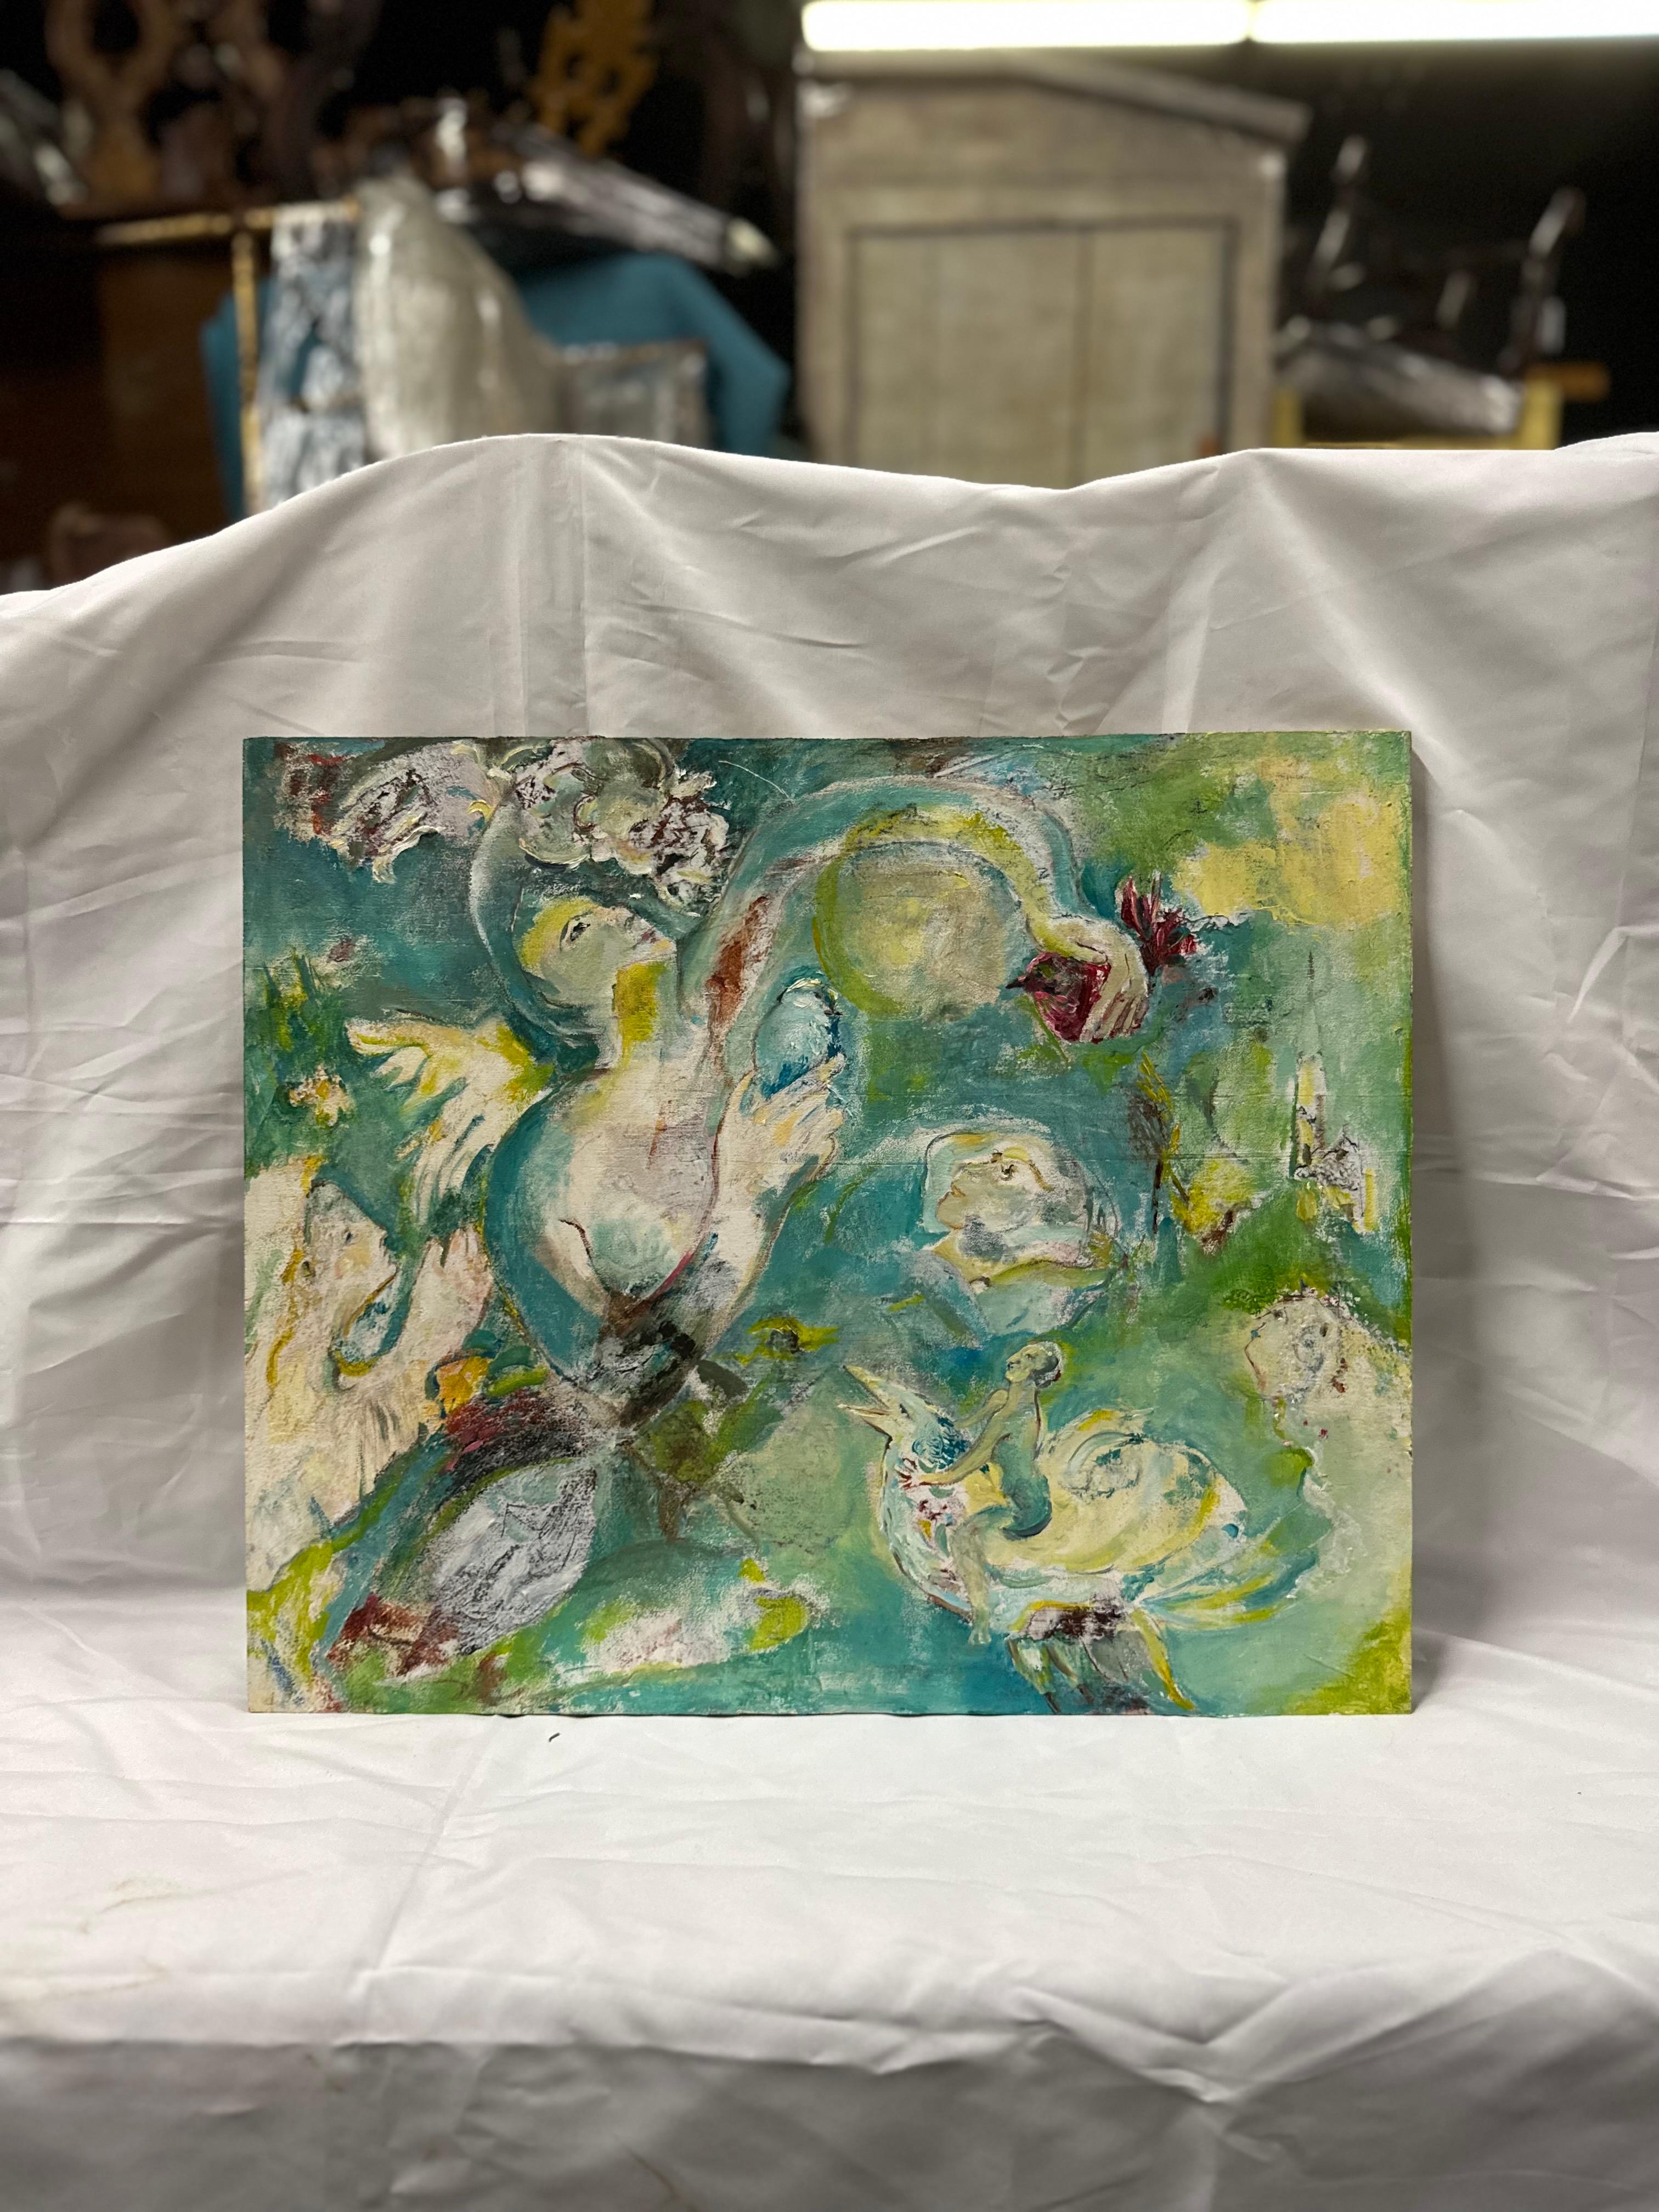 The Original French Abstract Painting on wooden board mesmerizes with its evocative blend of colors and textures. Predominantly swathed in serene shades of blue and green, the canvas exudes a sense of tranquility and harmony. Wisps of white